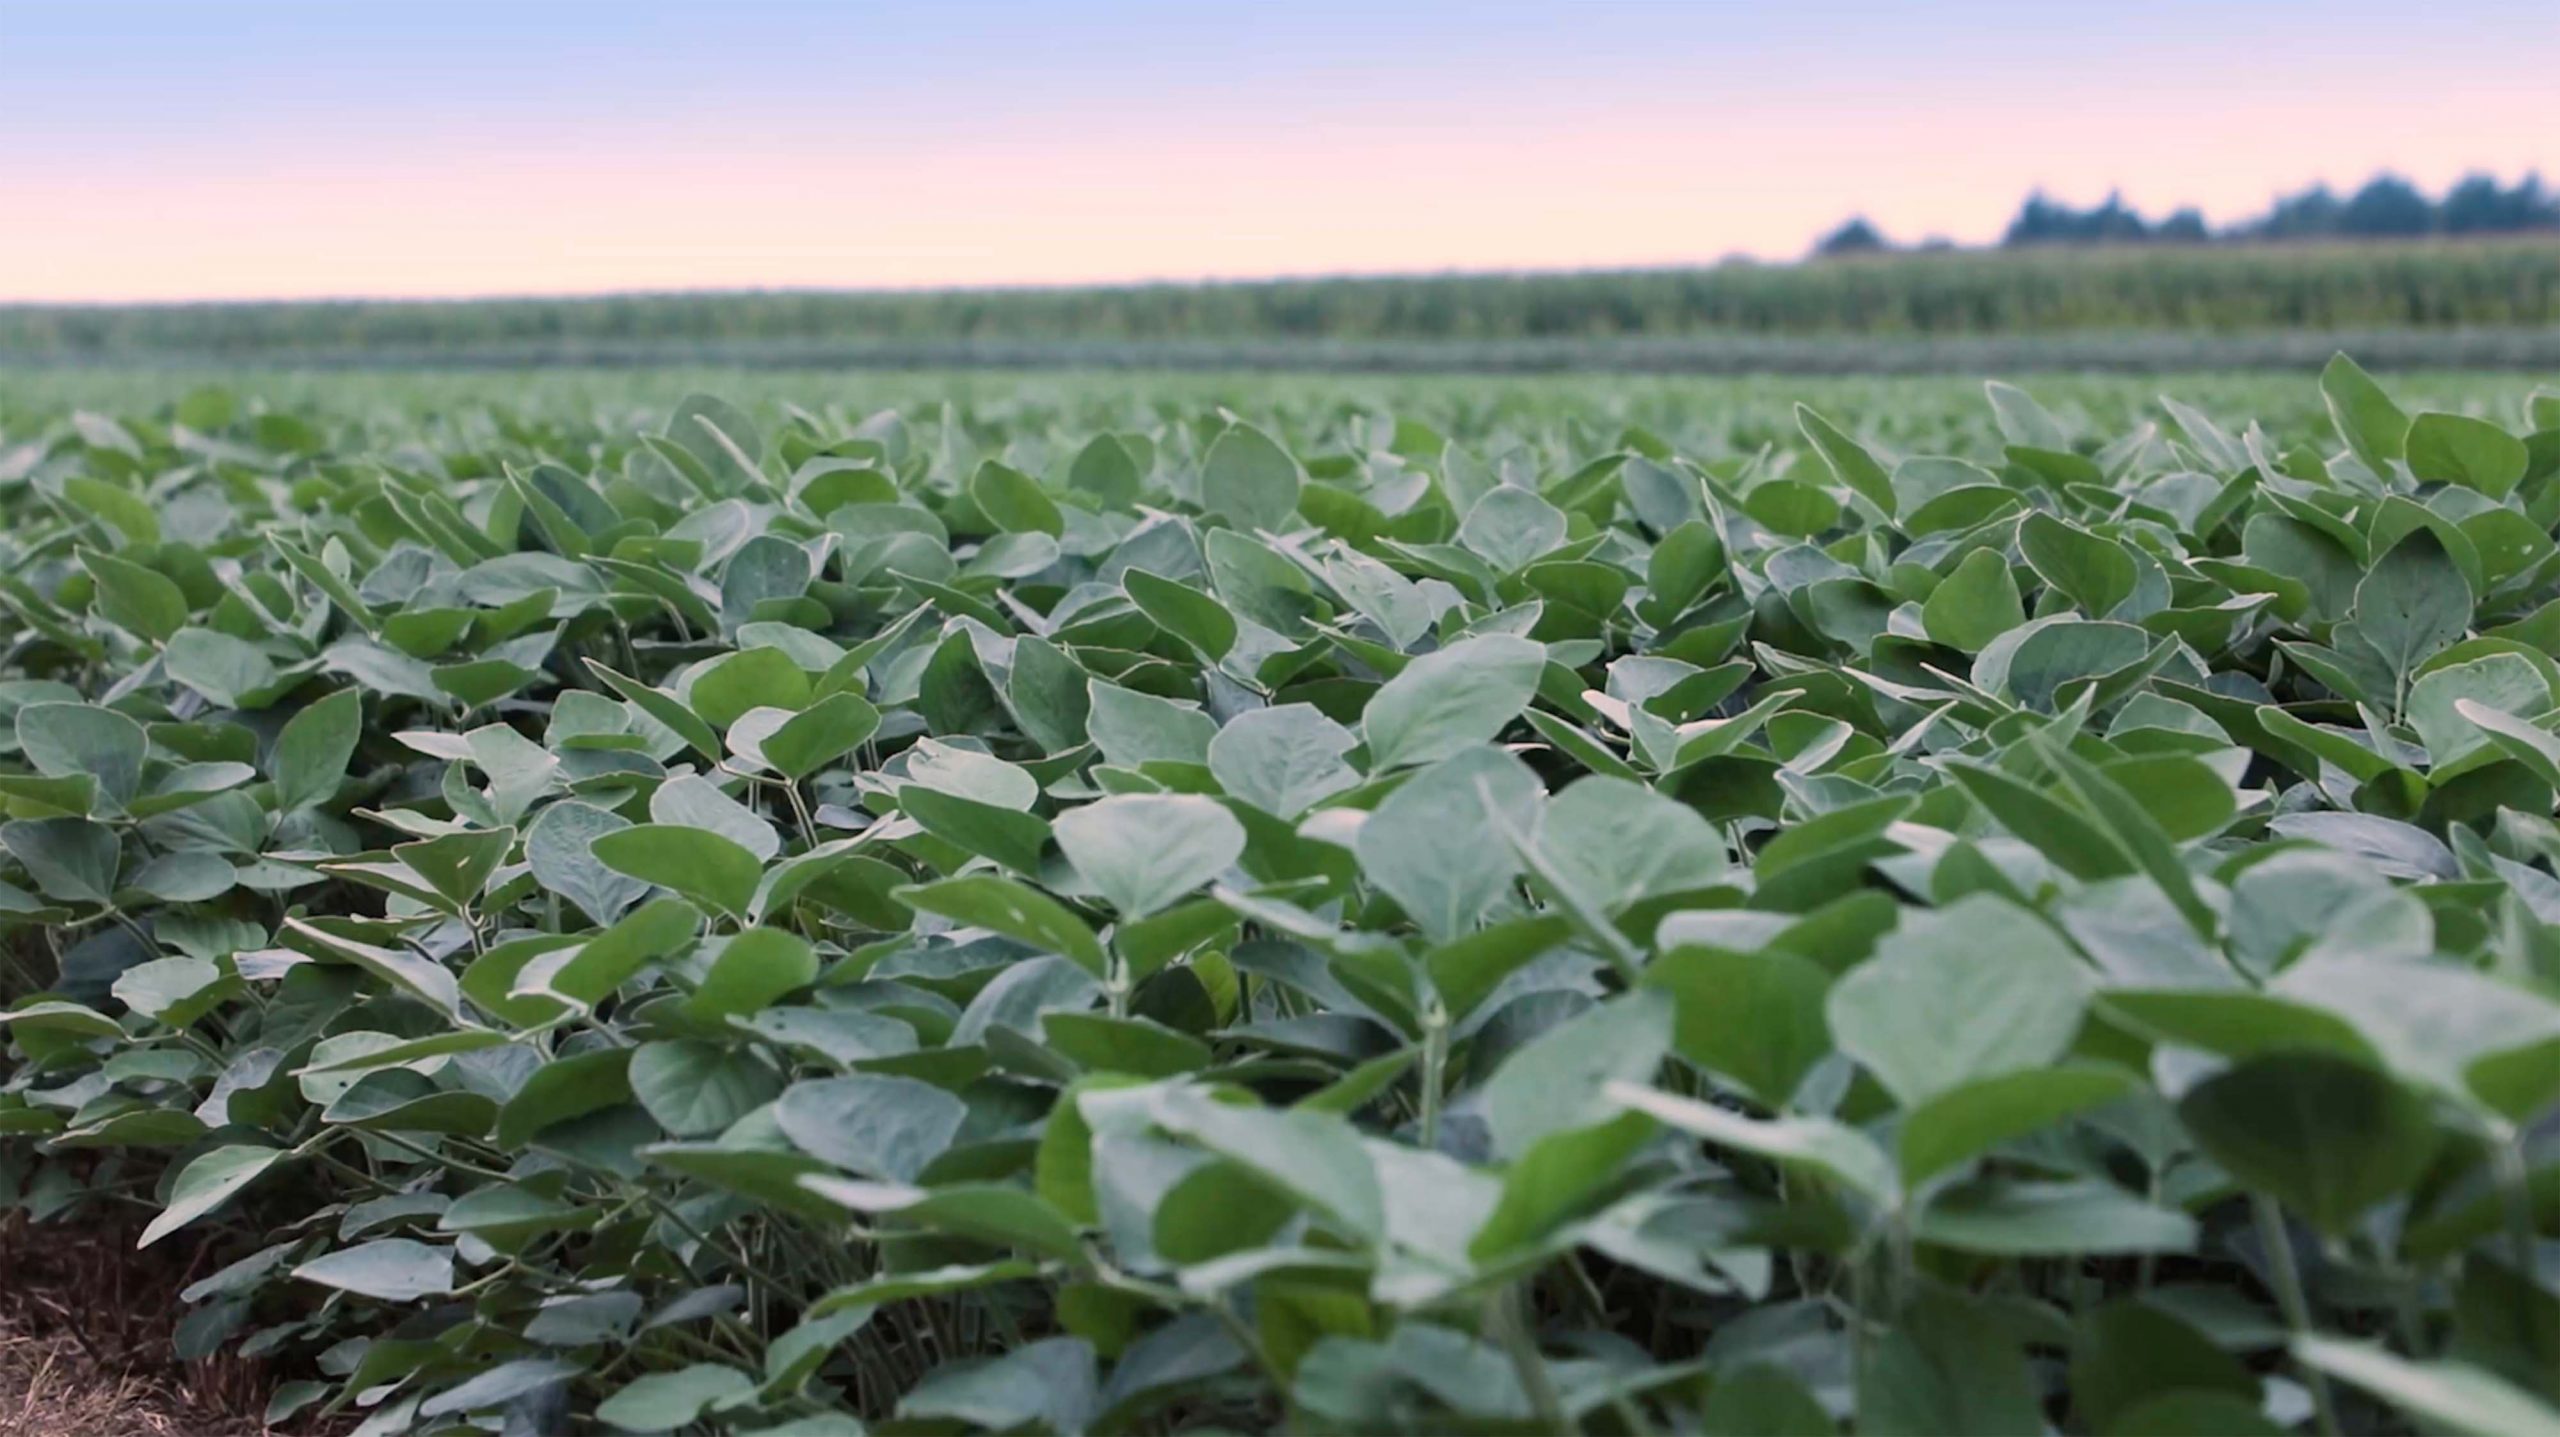 A close up view of a soybean field.